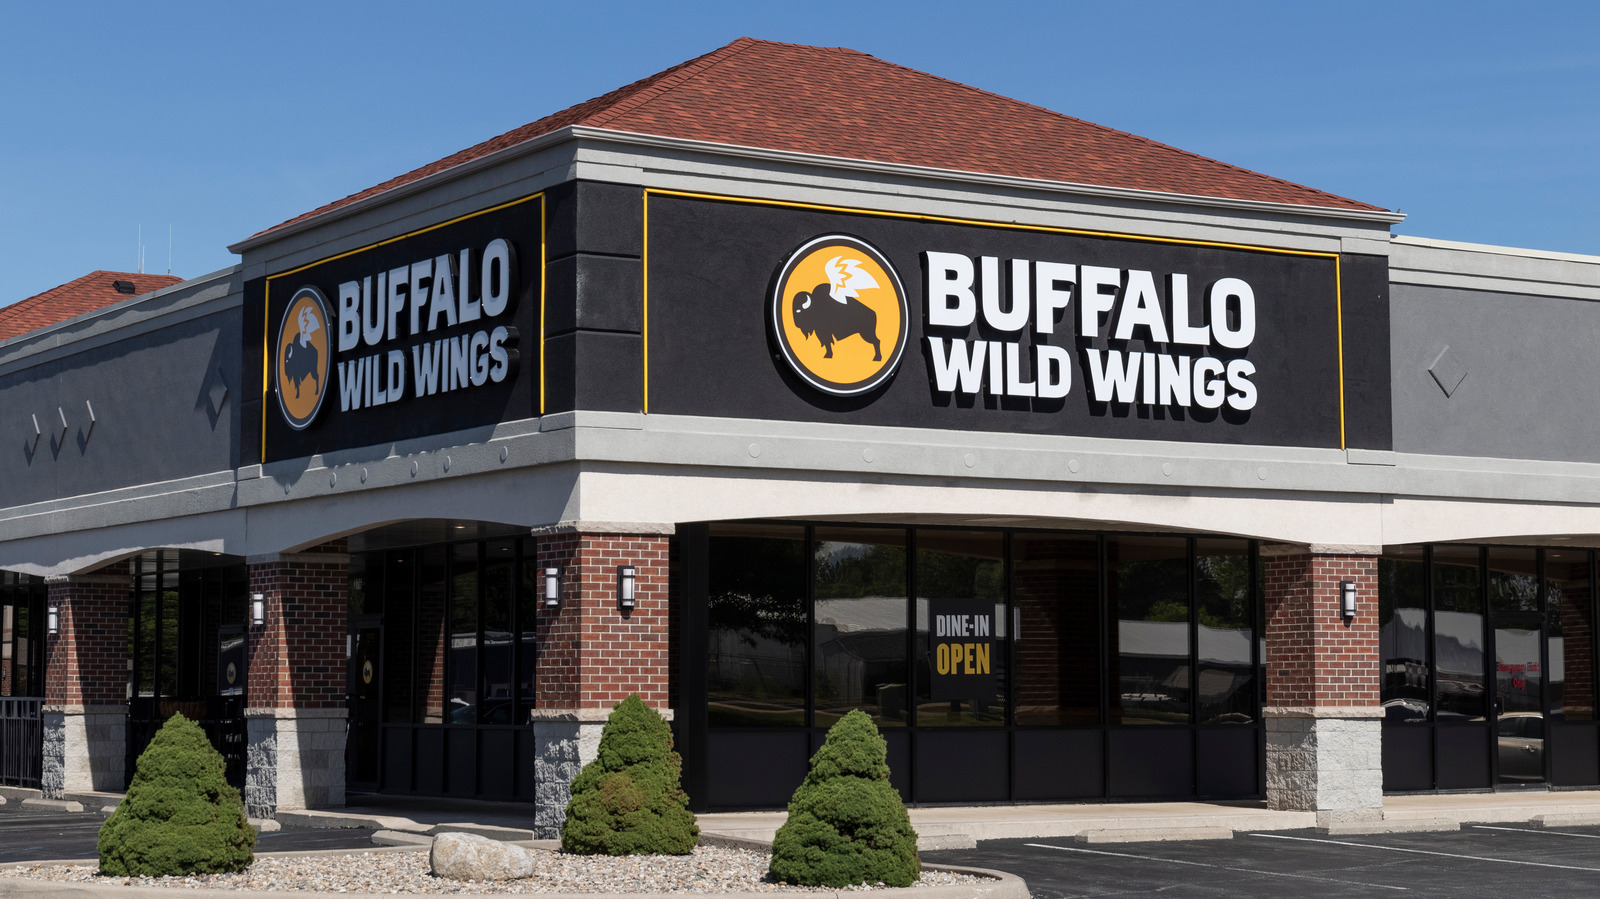 A Robot Named 'Wingy' Is Coming Buffalo Wild Wings In 2022